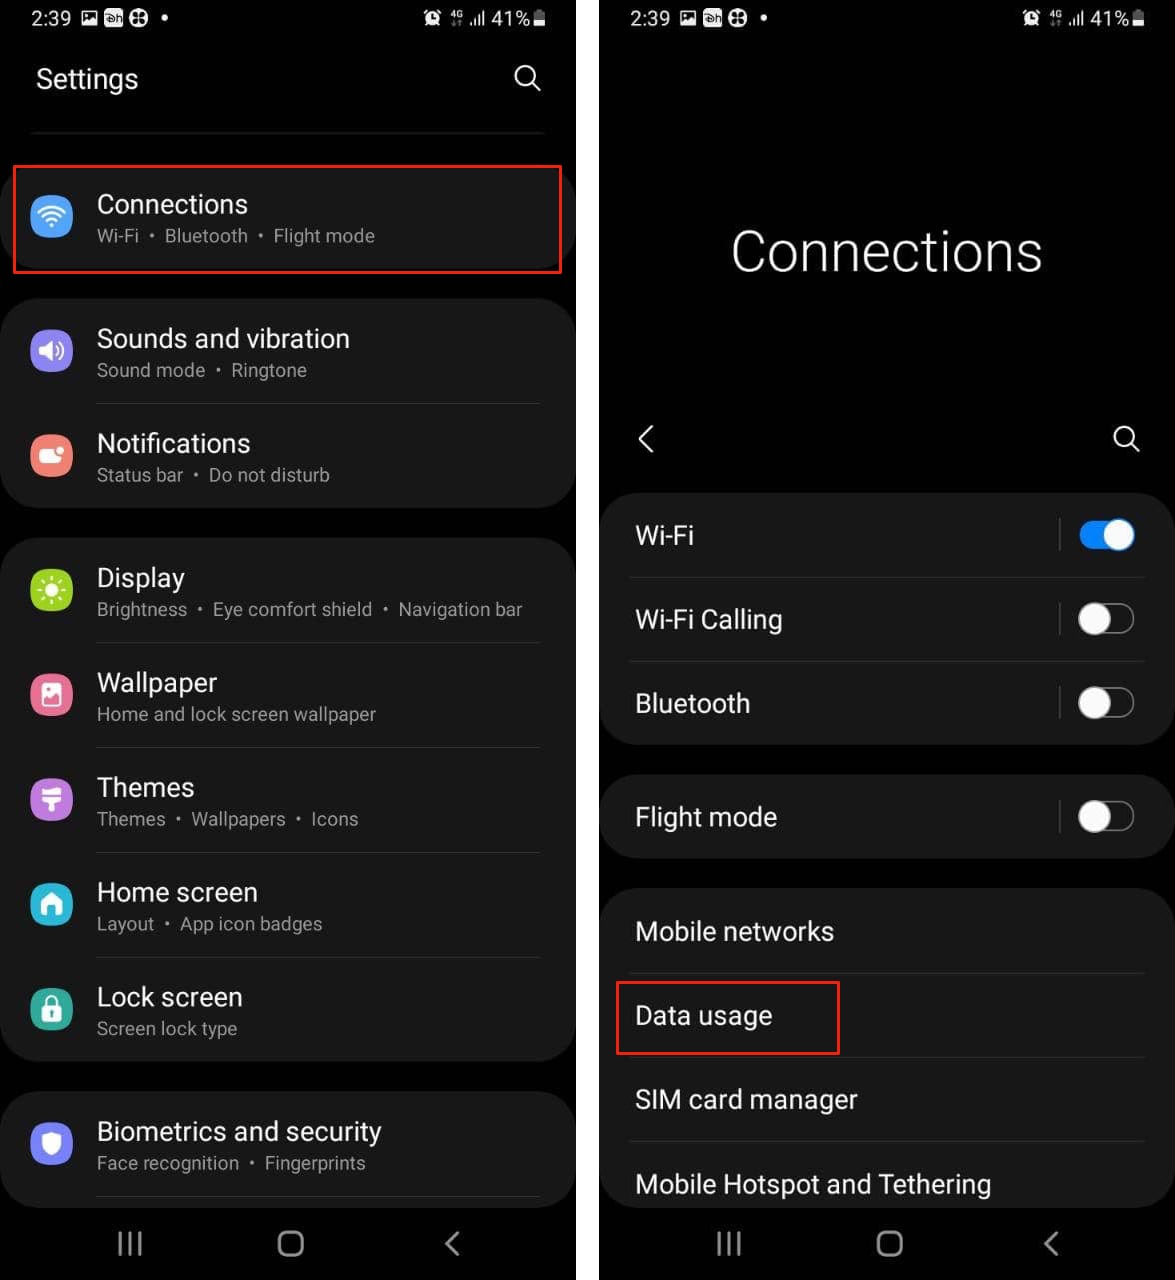 Open Settings and go to Connections